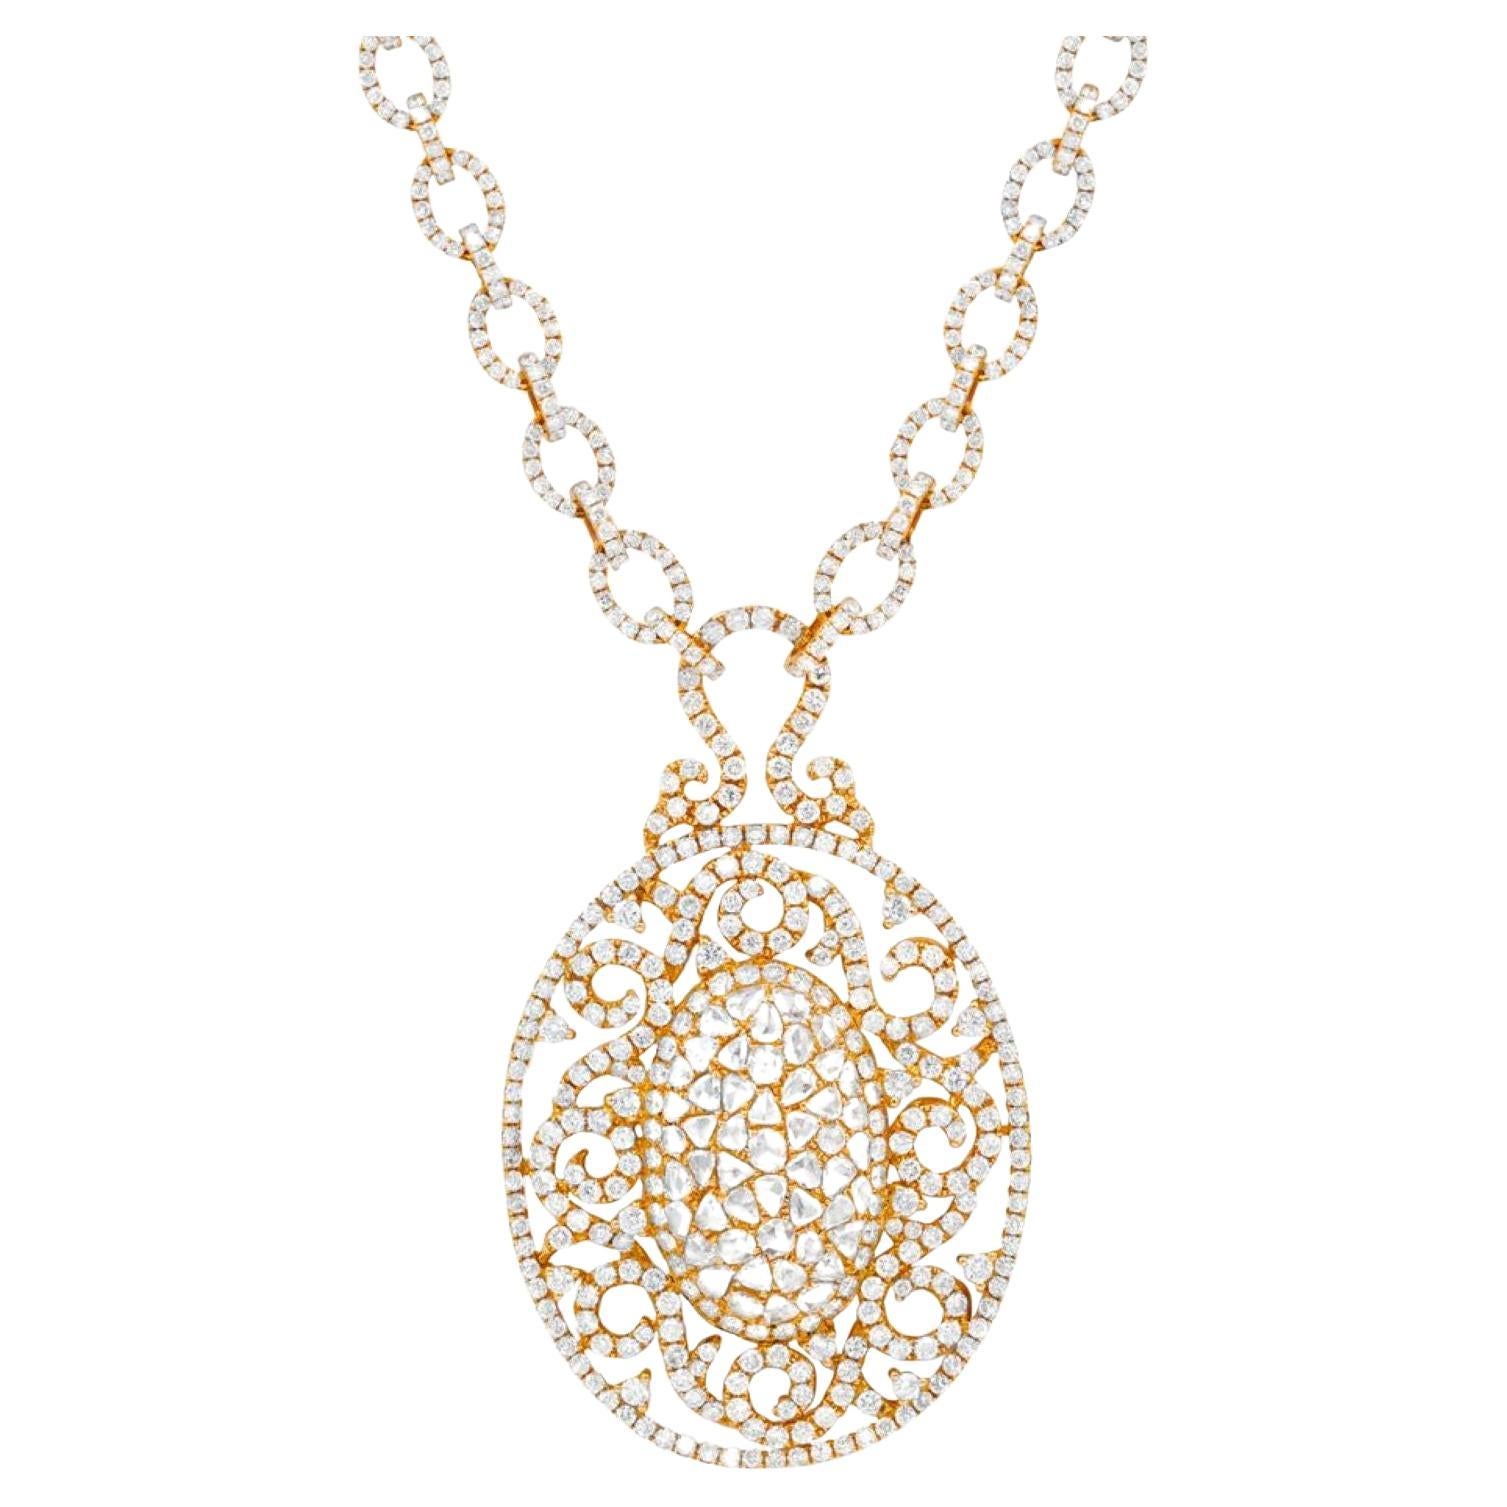 Diana M 12.43cts Diamond Pave Fashion Pendant in 18kt Rose Gold